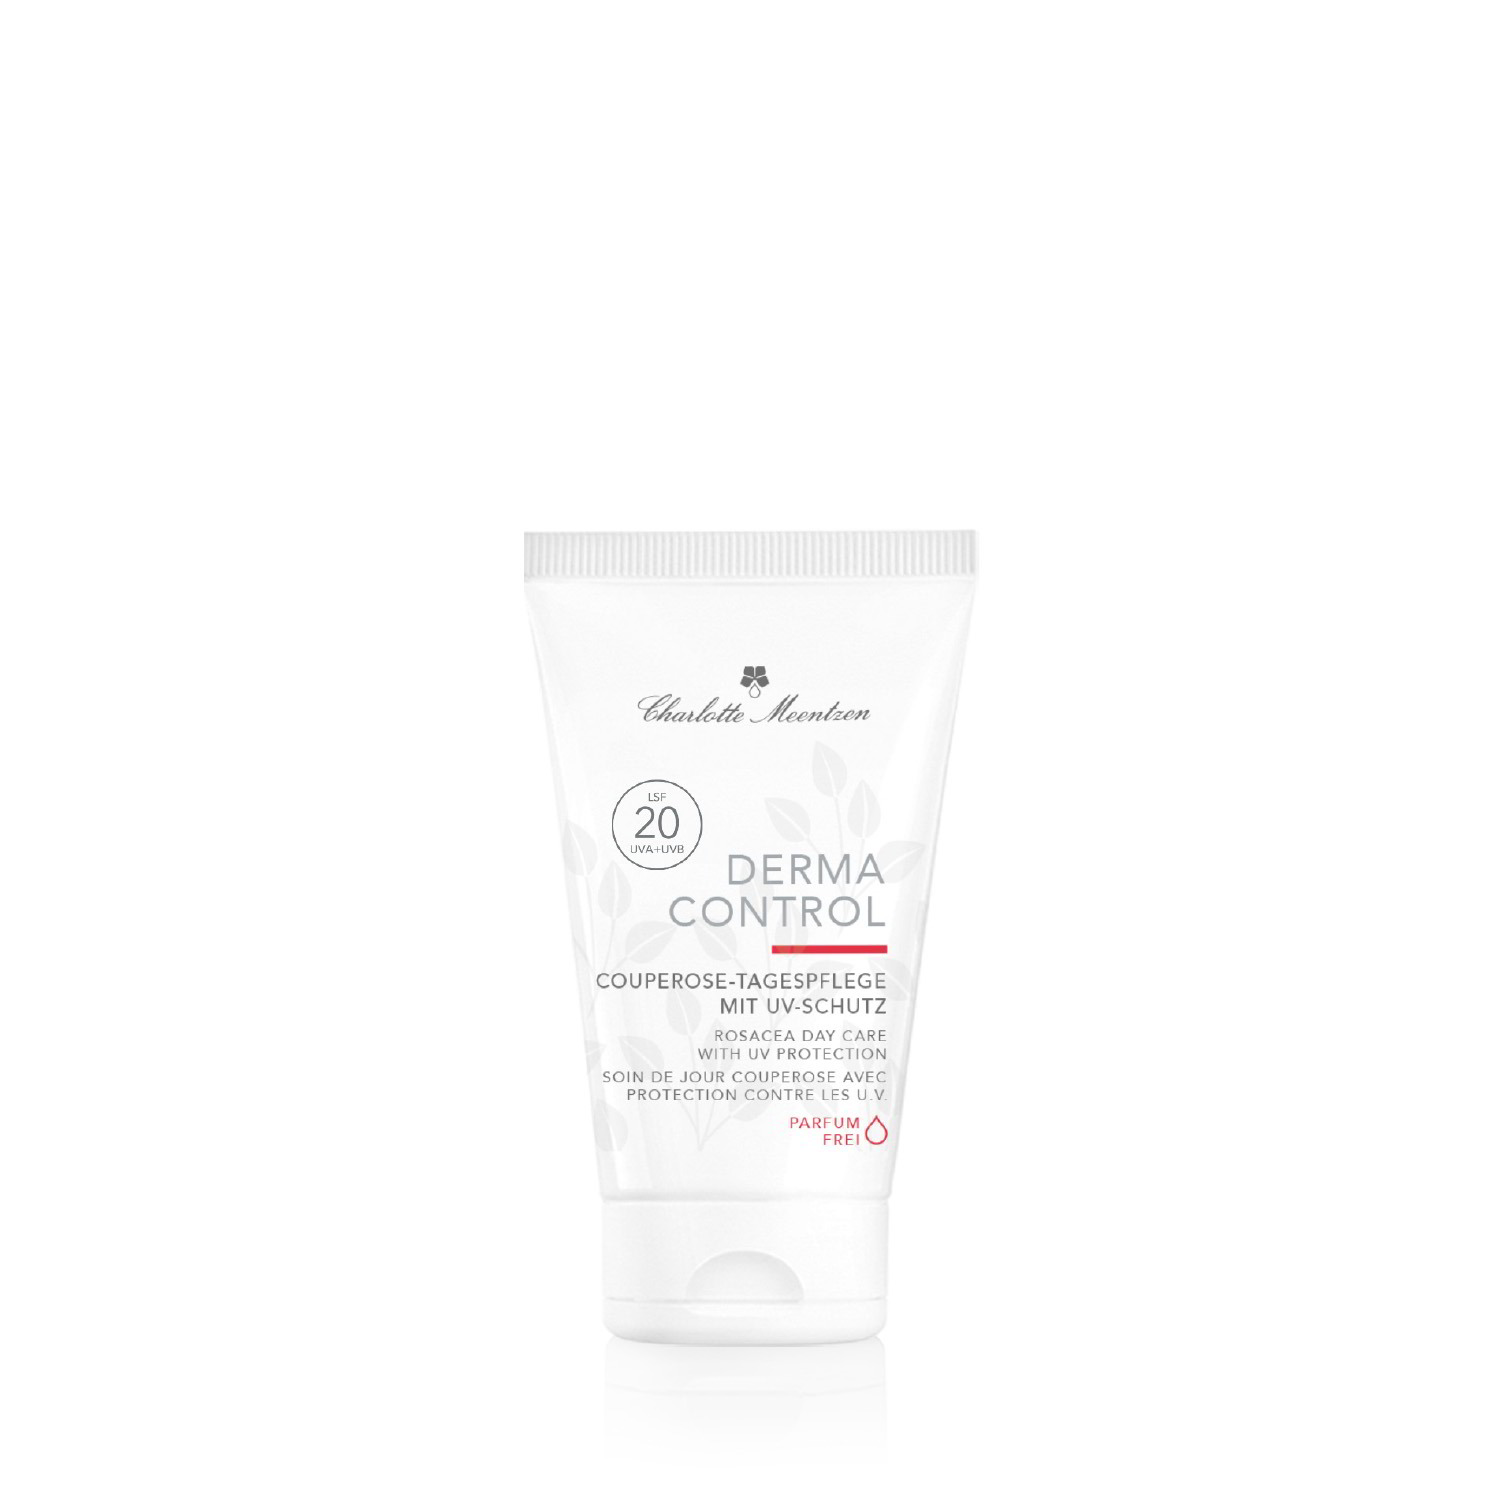 Derma Control Rosacea Day Care with LSF 20